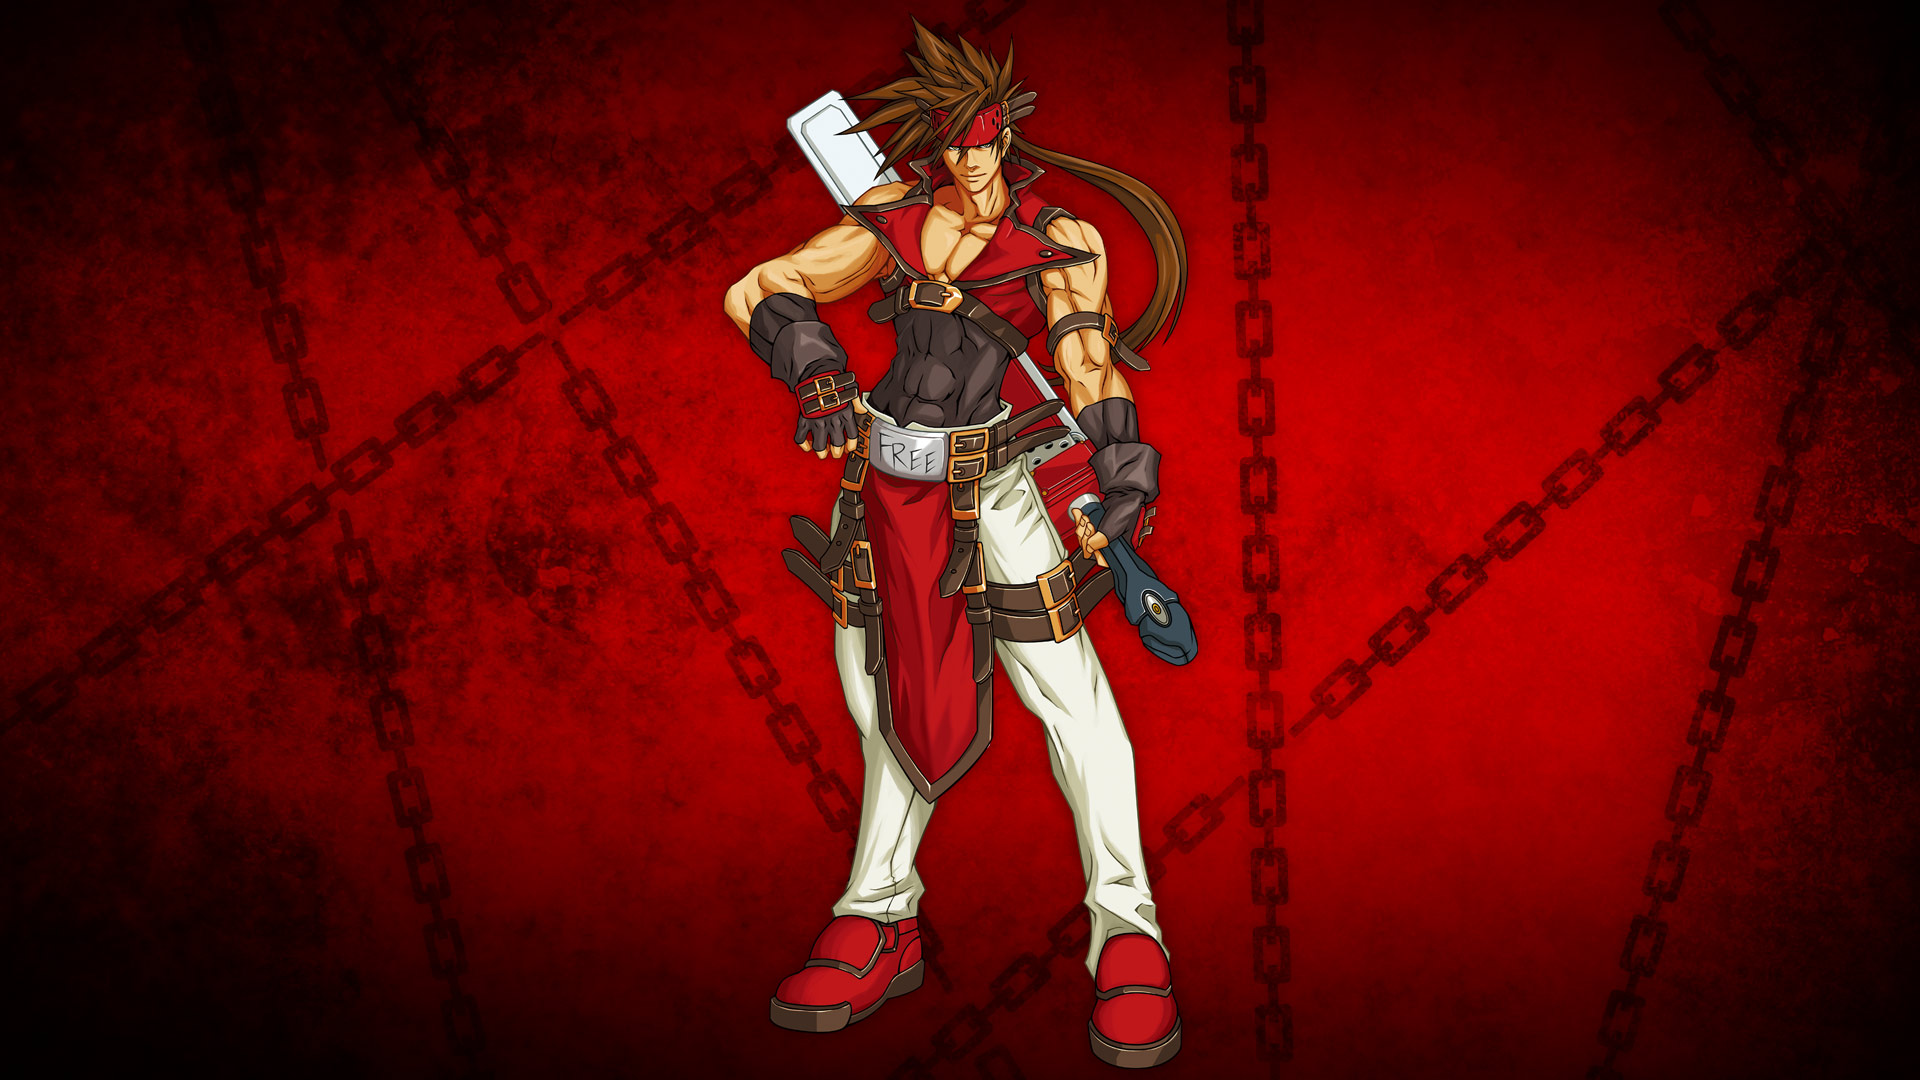 Guilty gear accent core plus r steam фото 71